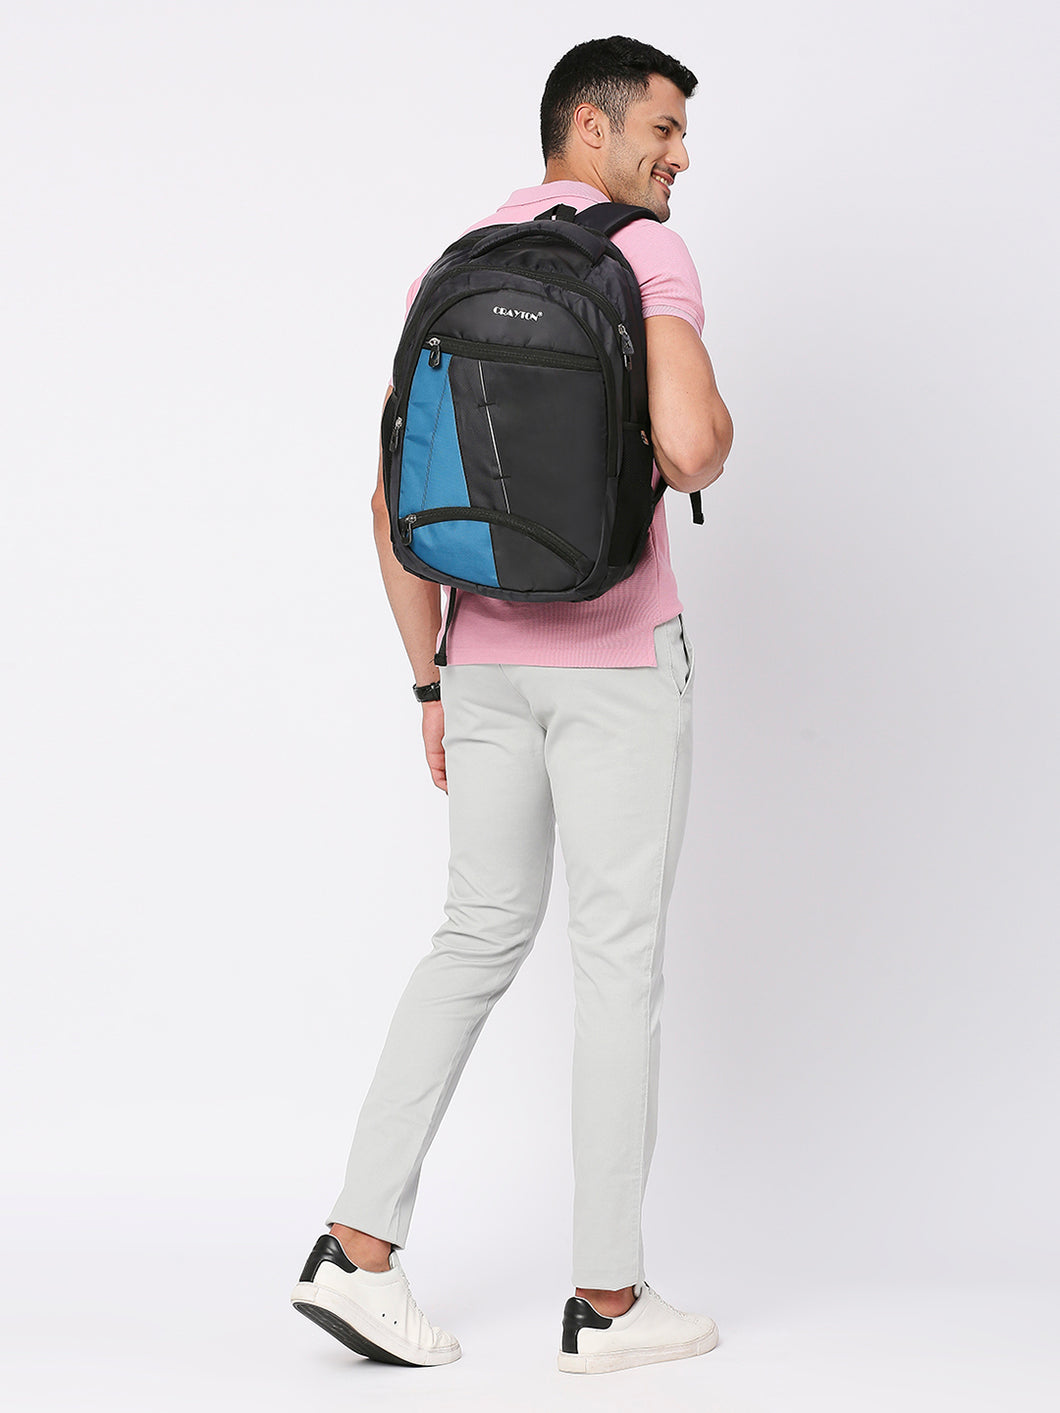 CRAYTON Black and Blue Backpack with Padded Laptop Compartment